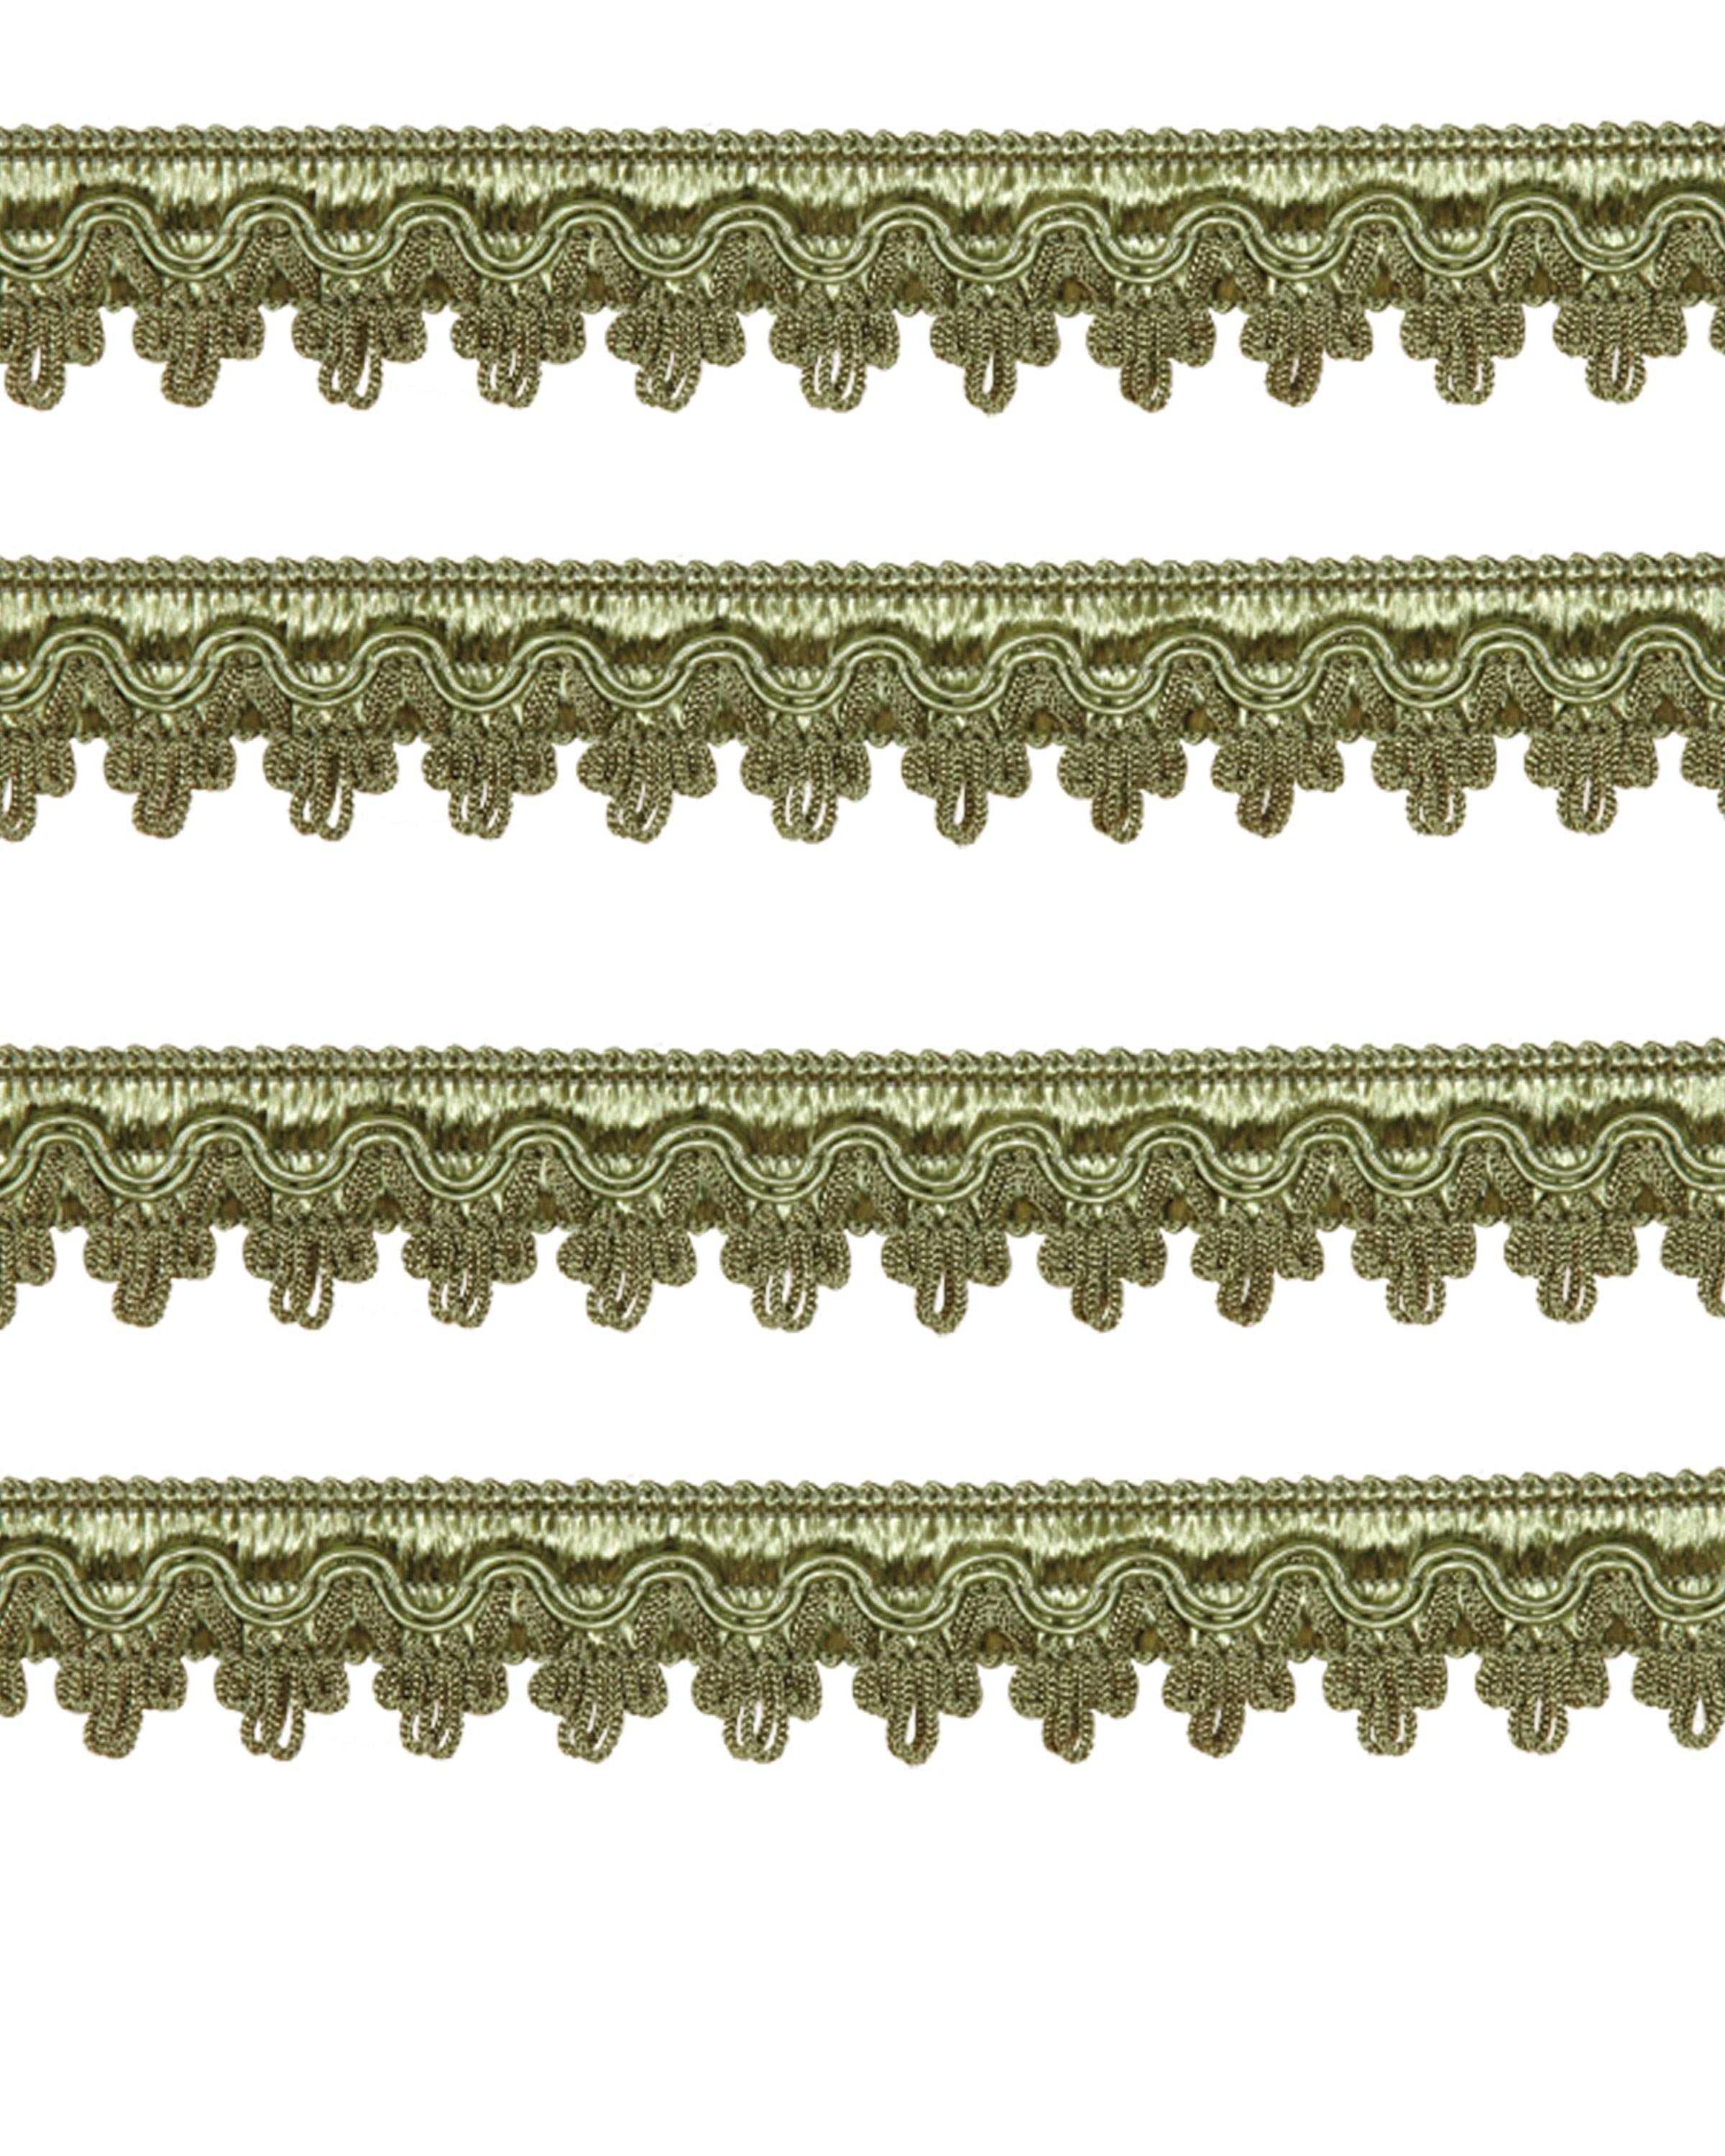 Large Fancy Braid - Antique Green 27mm Price is for 5 metres